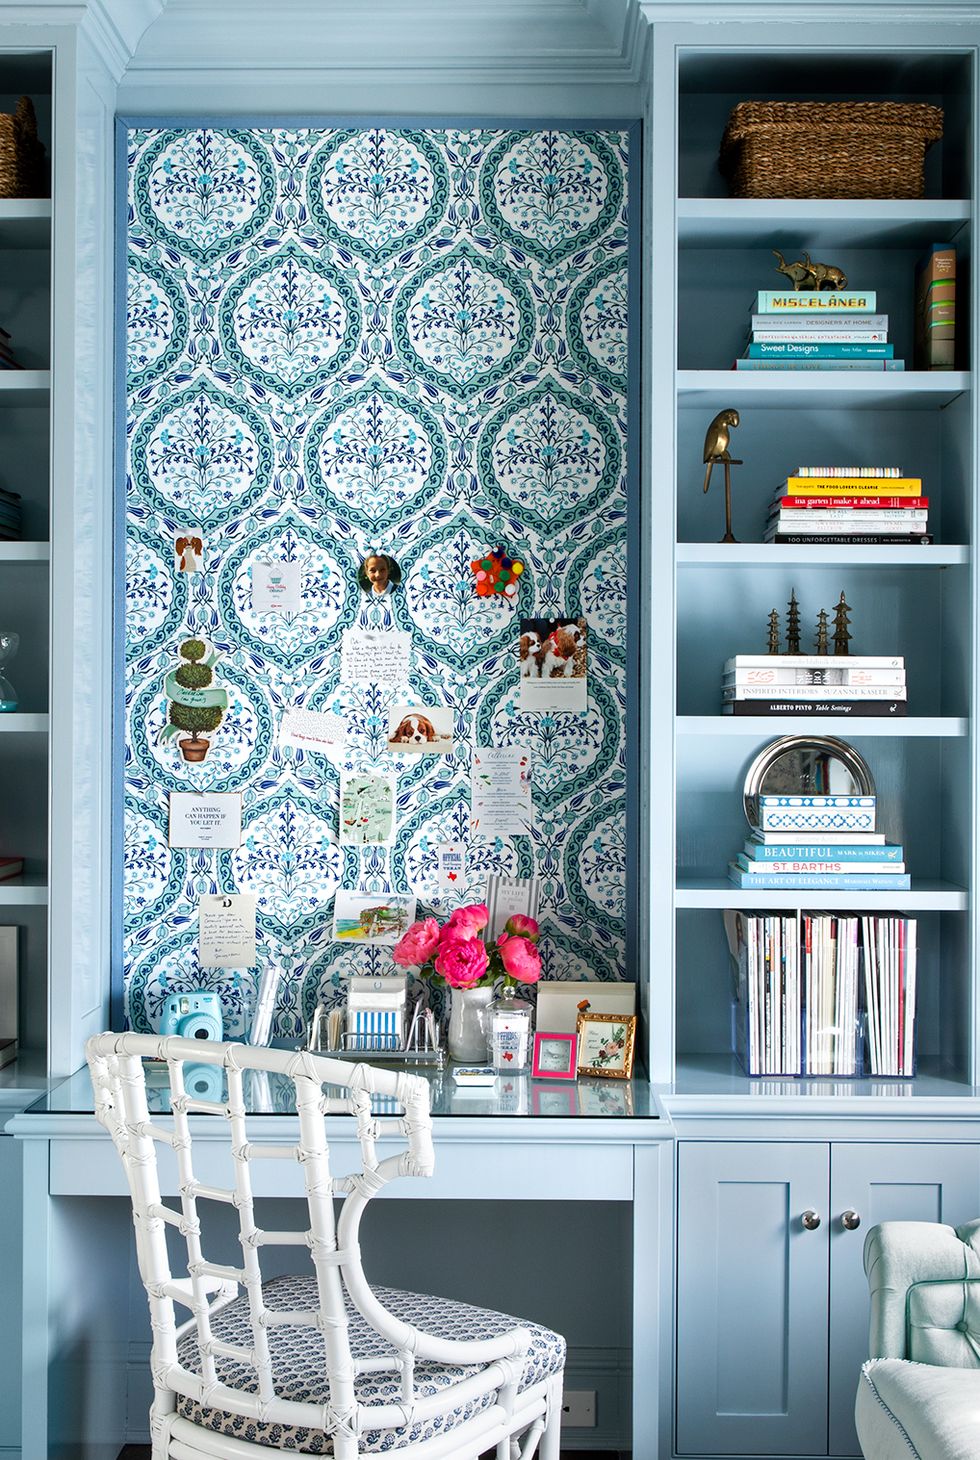 How to Beautifully Organize Home Office Supplies: 20 Tips